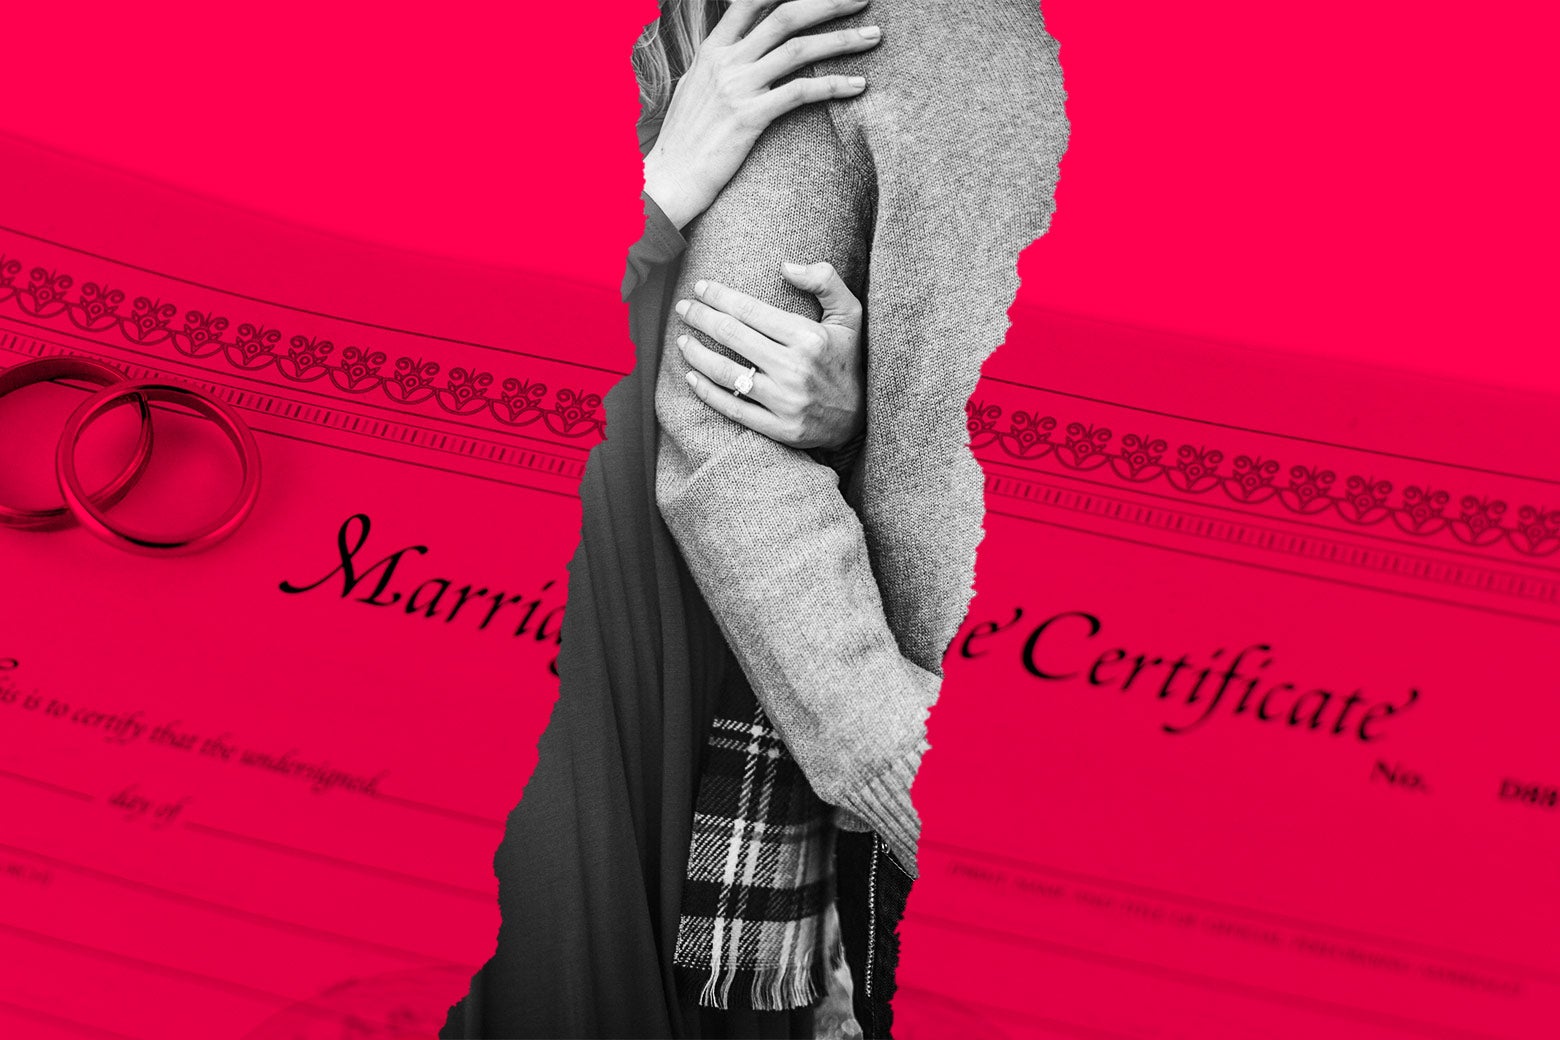 Woman holding onto a man's arm, with a background of a marriage certificate.